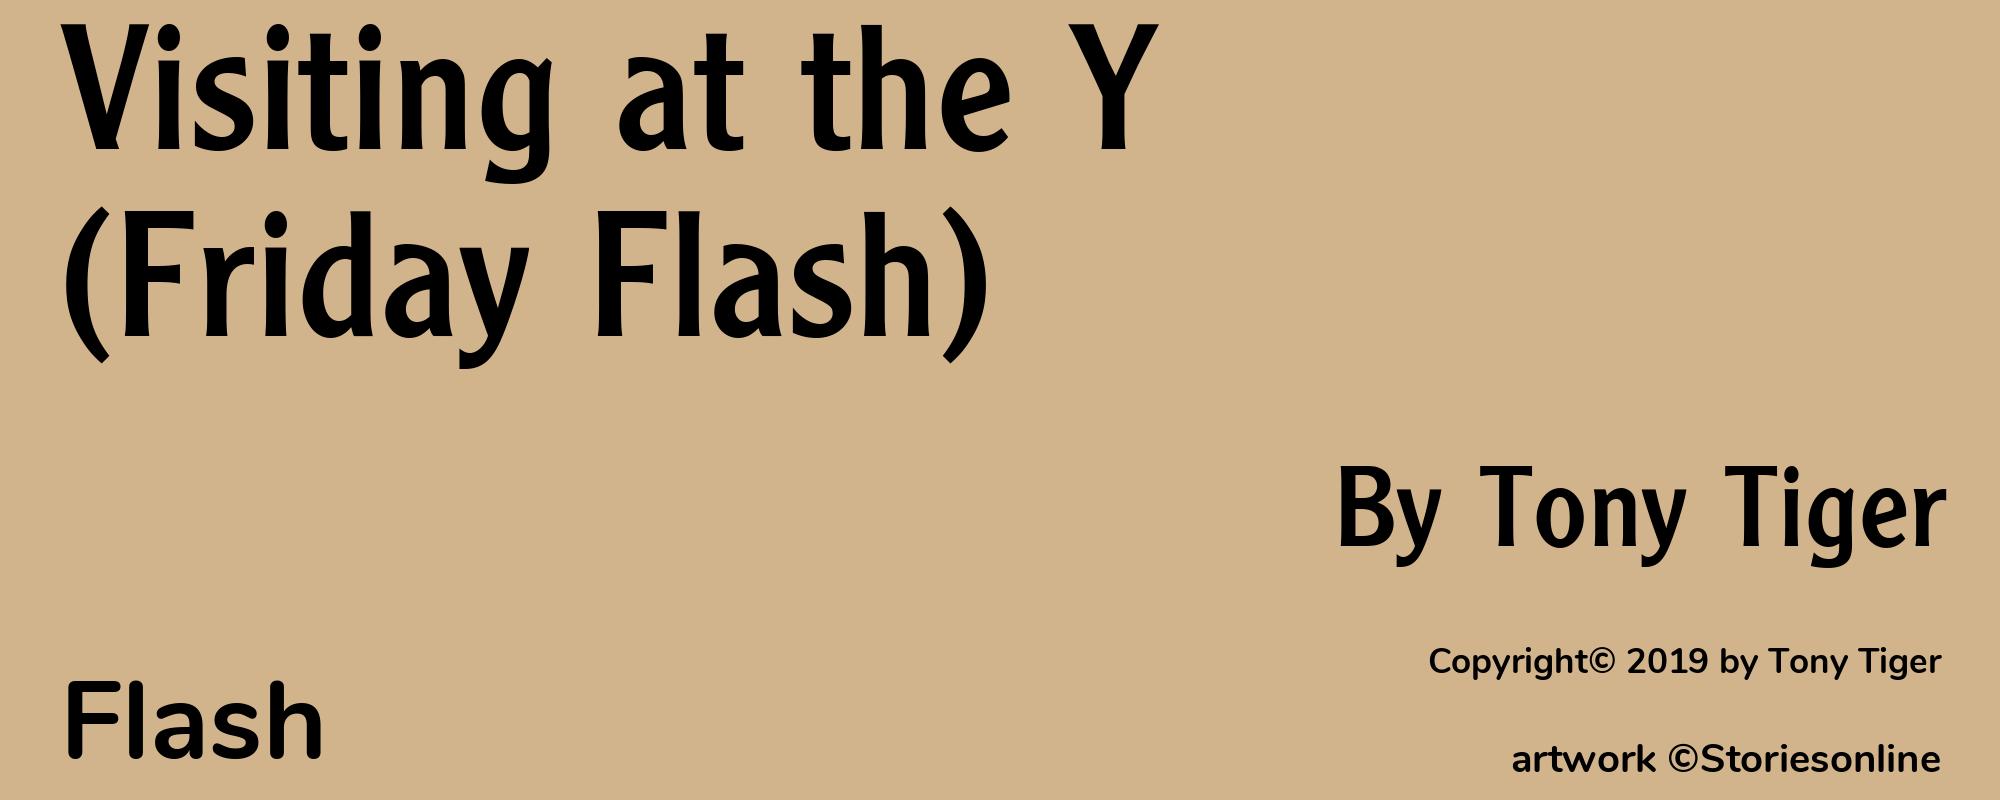 Visiting at the Y (Friday Flash) - Cover